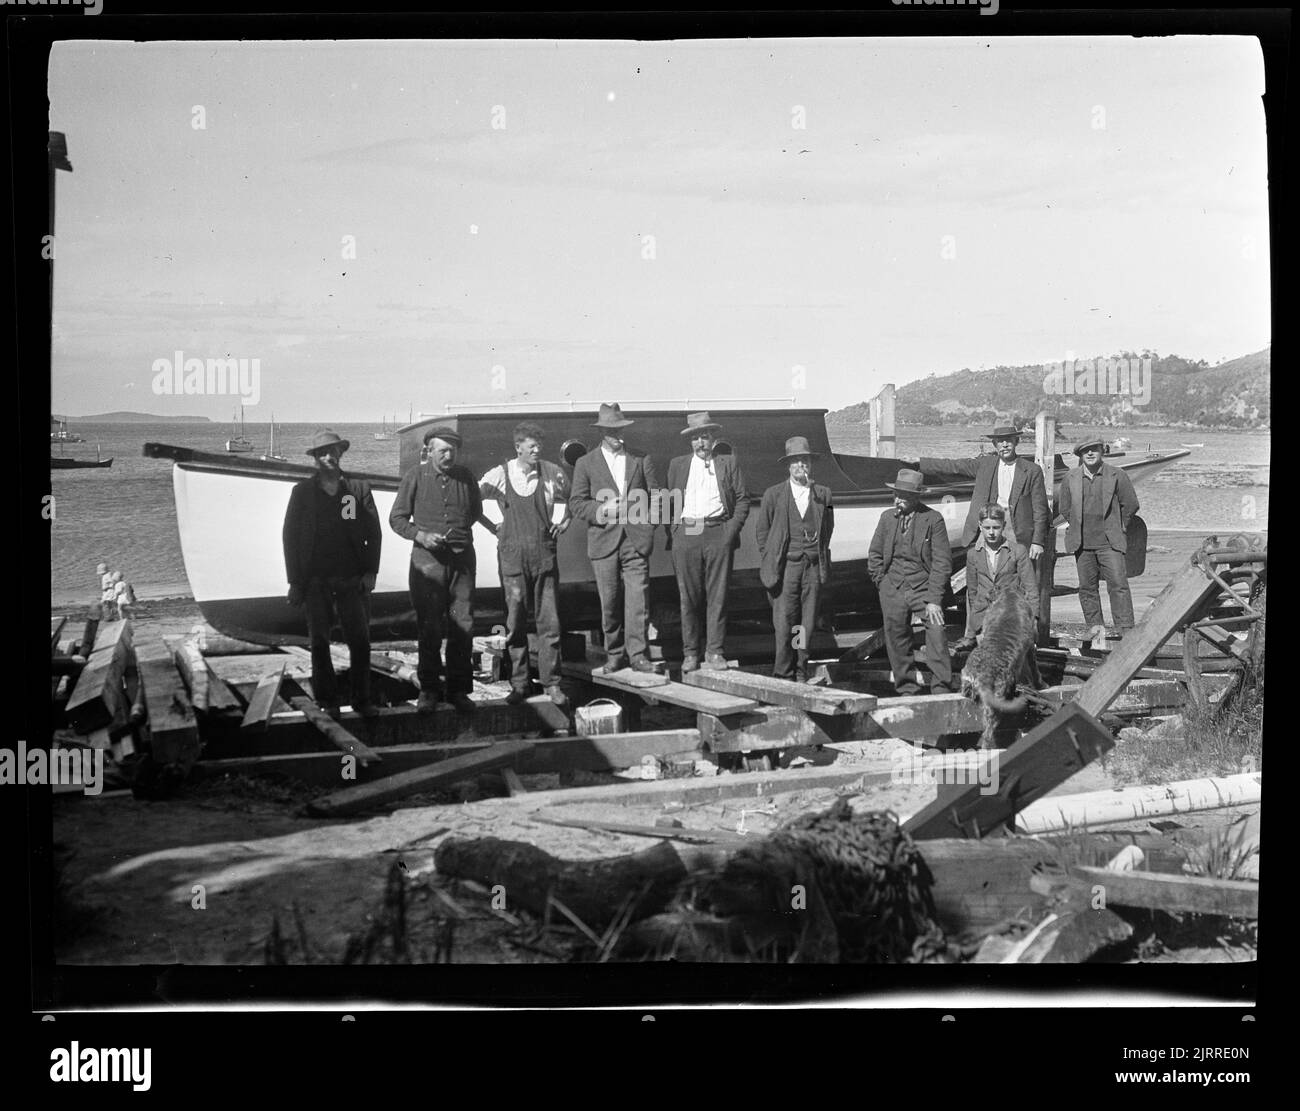 The 'Pearl' and builders, 1929-1930, Stewart Island, maker unknown. Stock Photo